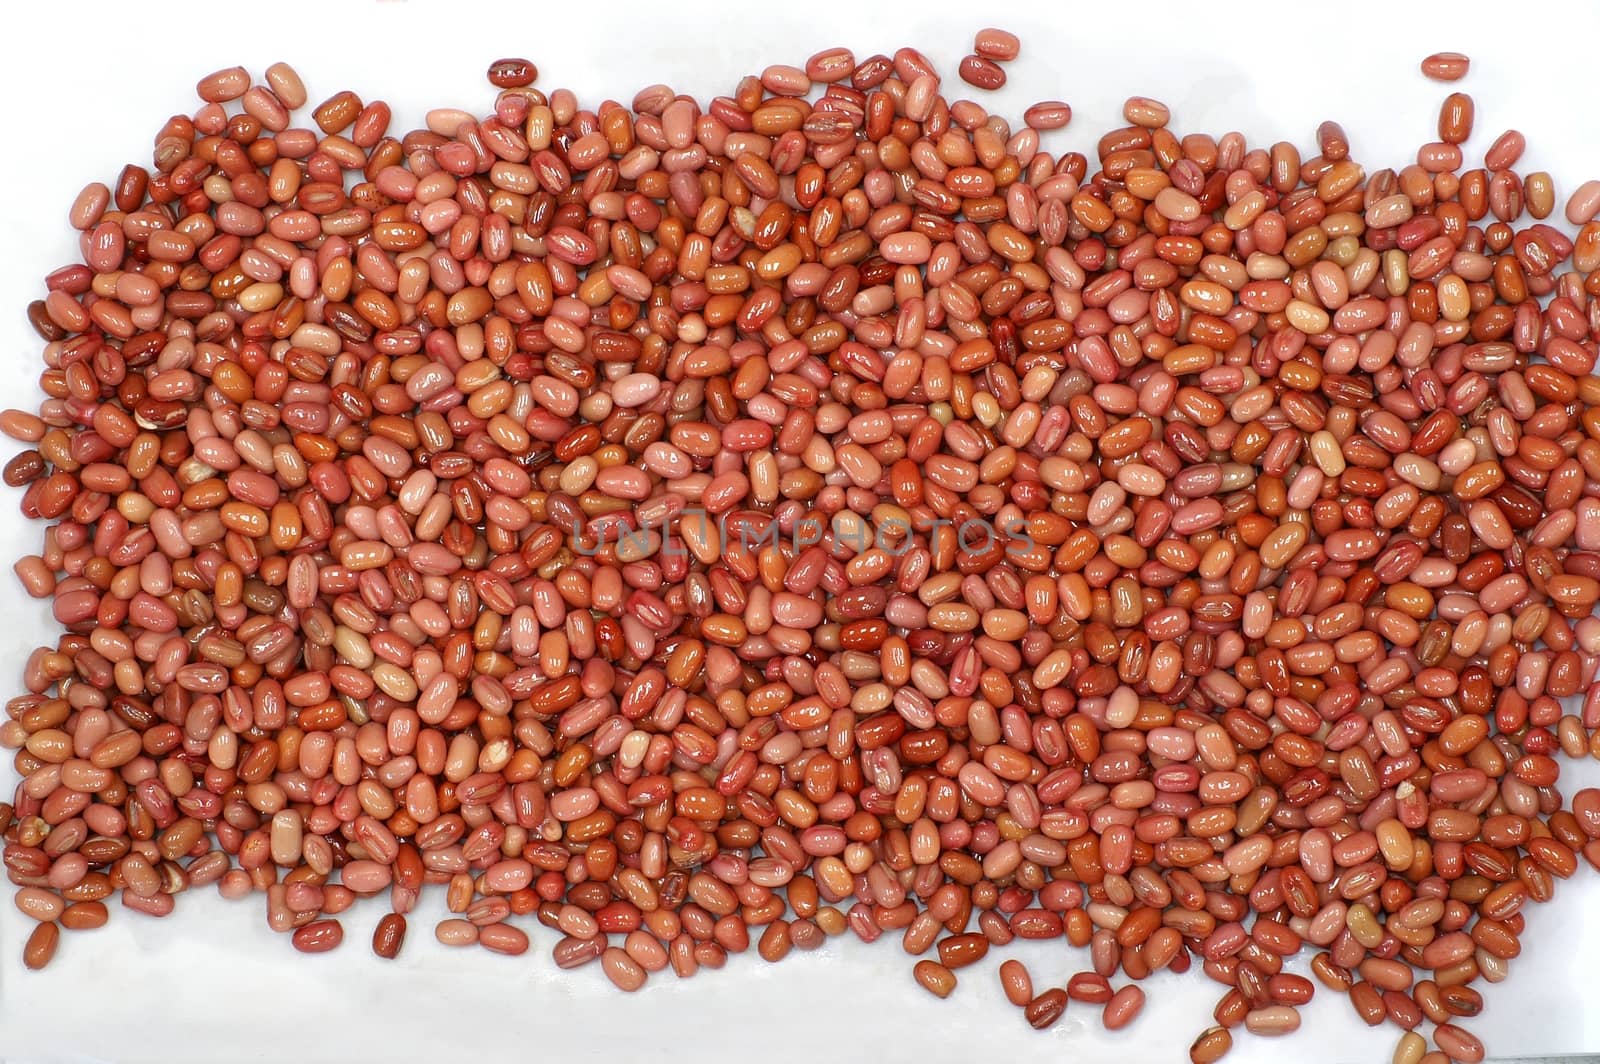 grain and pulses